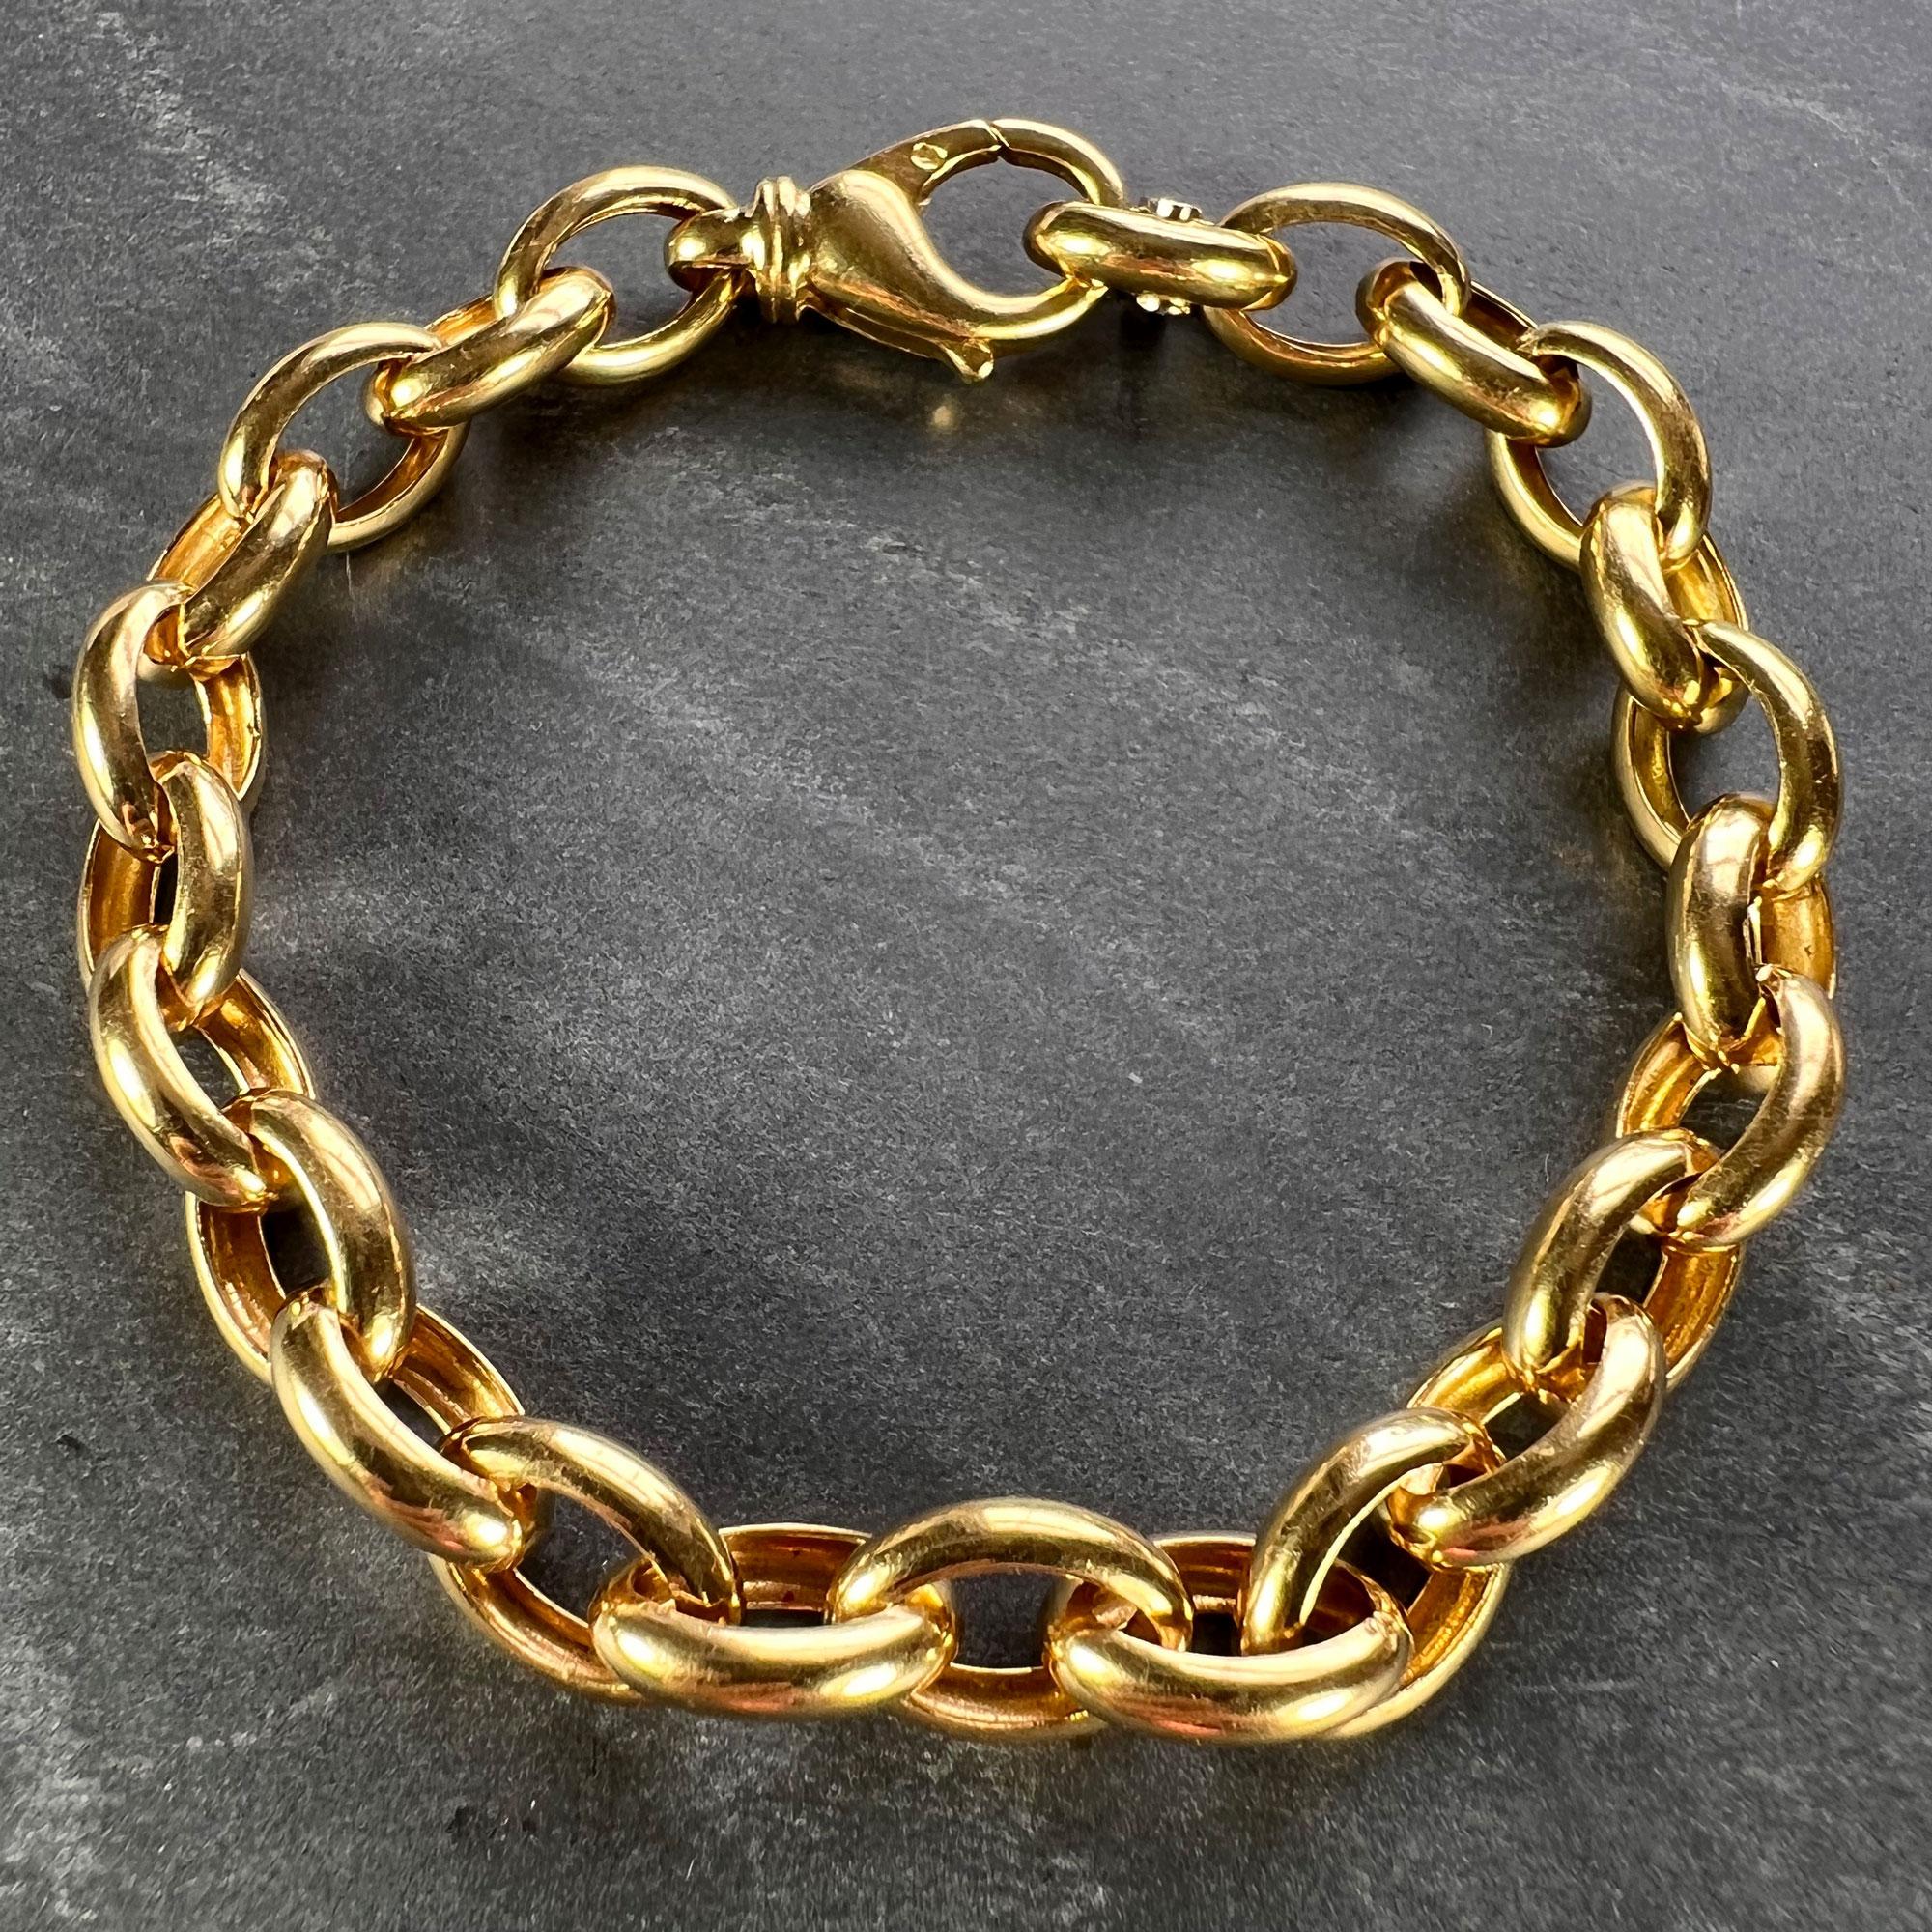 An 18 karat white and yellow gold chunky oval link bracelet with a lobster clasp. 7.5” long. Stamped 750 for 18 karat gold with an unknown maker's mark.

Dimensions: 19 x 0.8 x 0.8 cm
Weight: 17.34 grams
